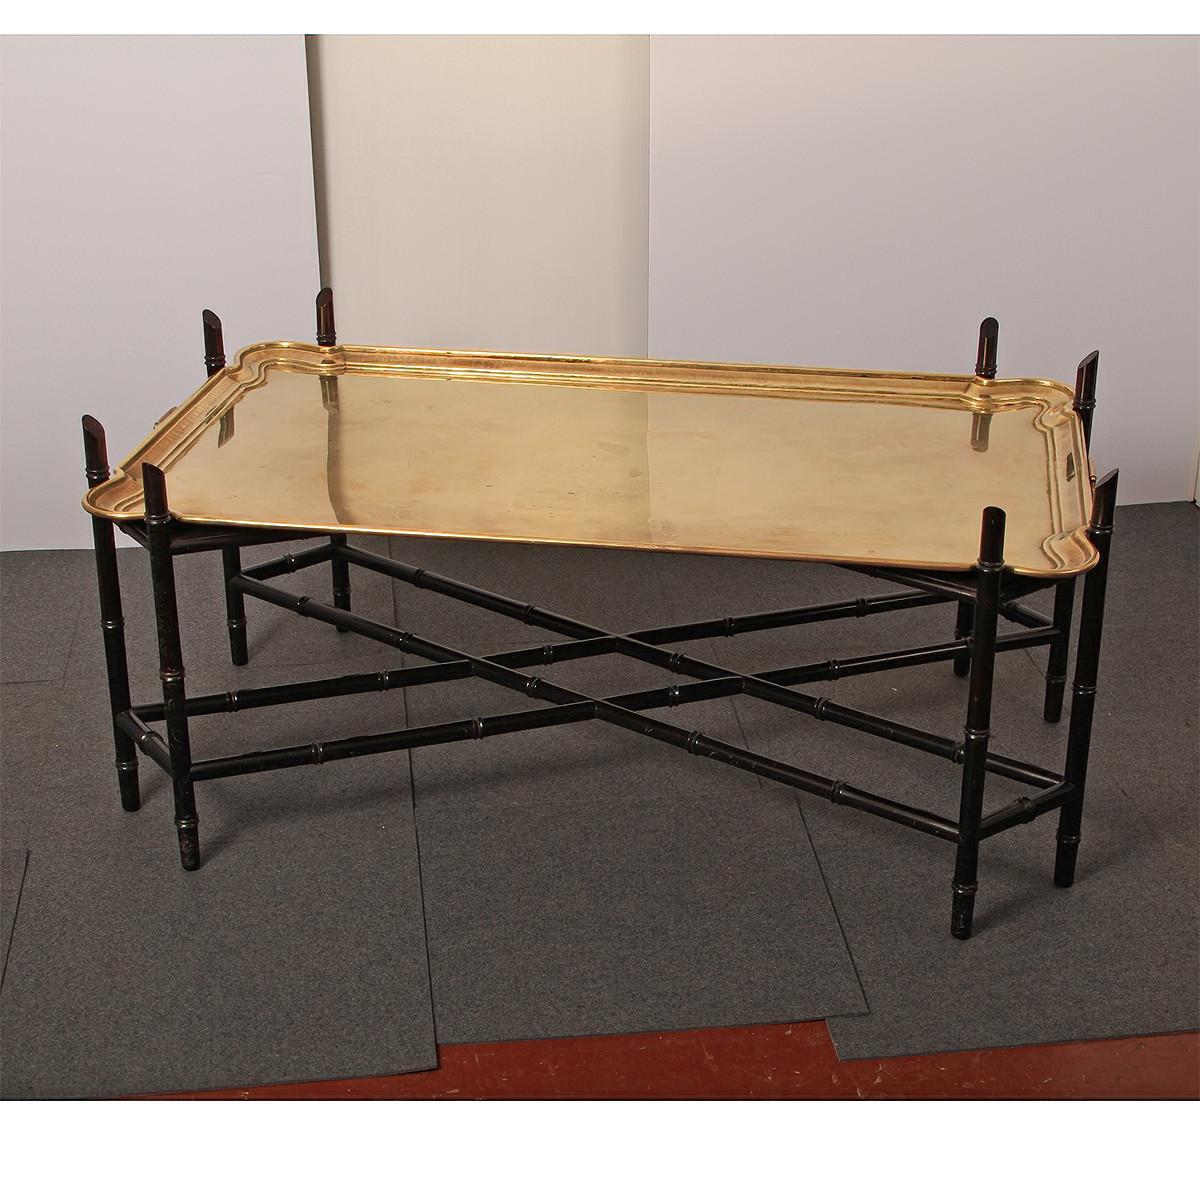 Brass tray top coffee table raised on a black lacquered faux bamboo eight-legged base with a double X form stretcher. The brass tray with two handles, Germany ca 1900.

Dimensions: 49